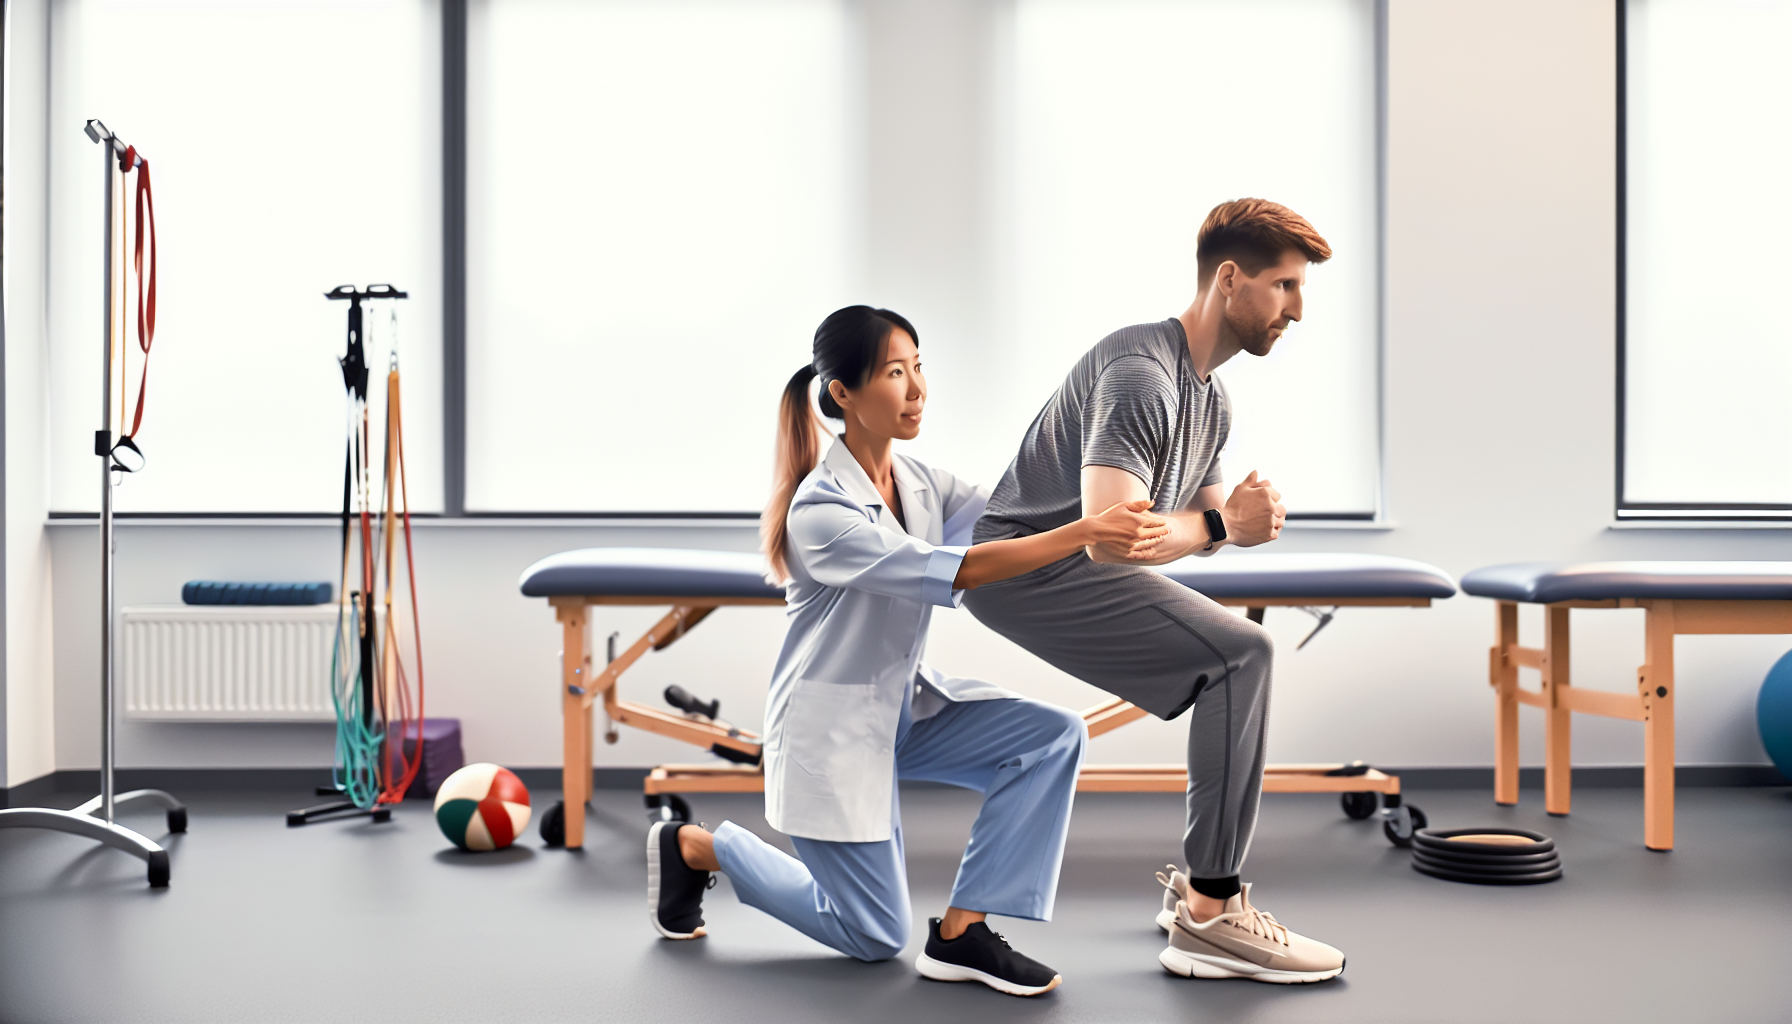 Physical therapist assisting patient with exercises